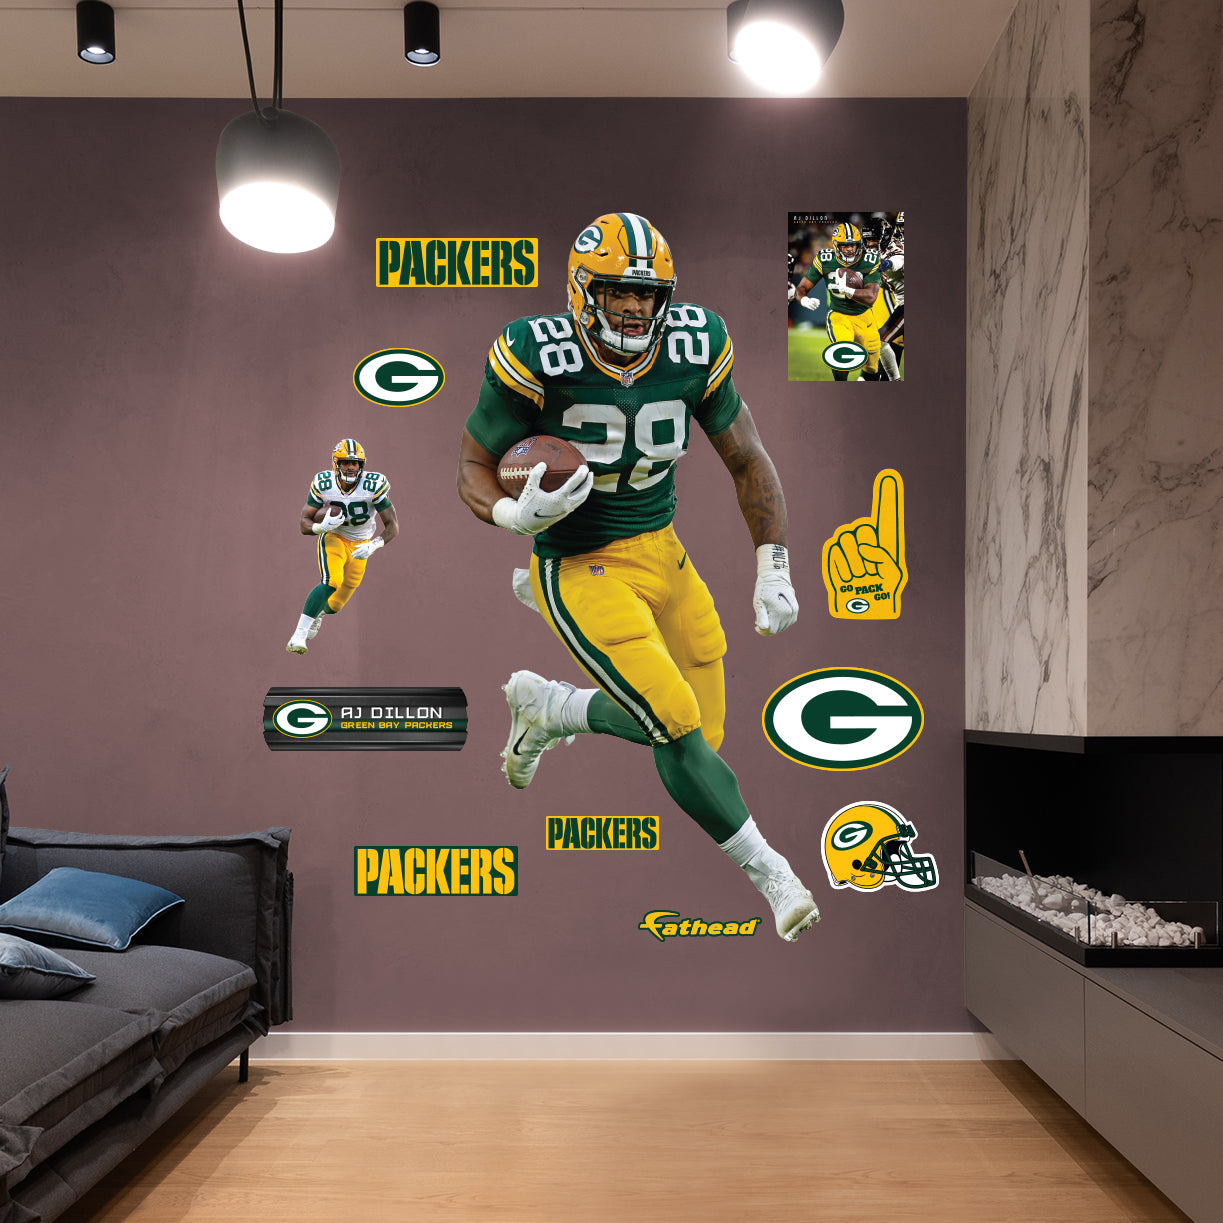 green bay packers licensed products